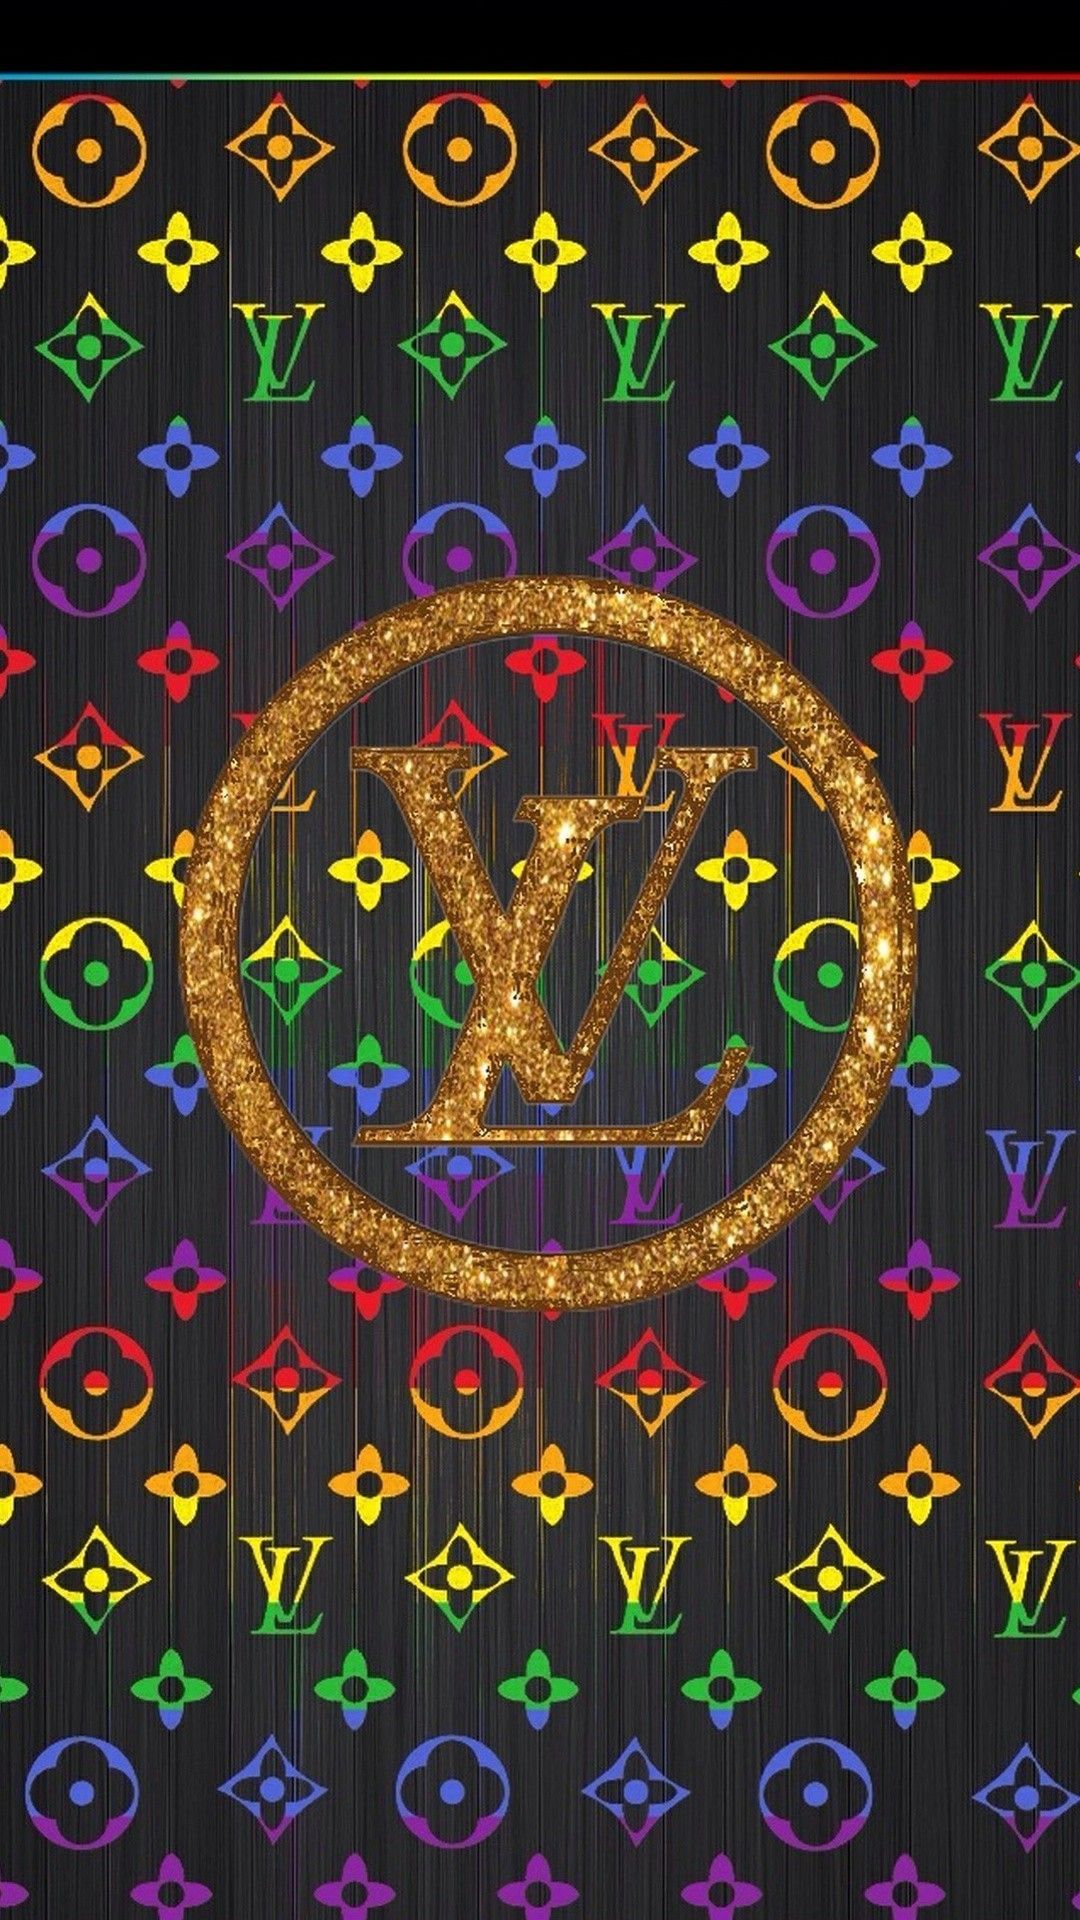 Pink and Gold Louis Vuitton iPhone wallpaper #Luxurydotcom  New wallpaper  iphone, Louis vuitton pink, Louis vuitton iphone wallpaper